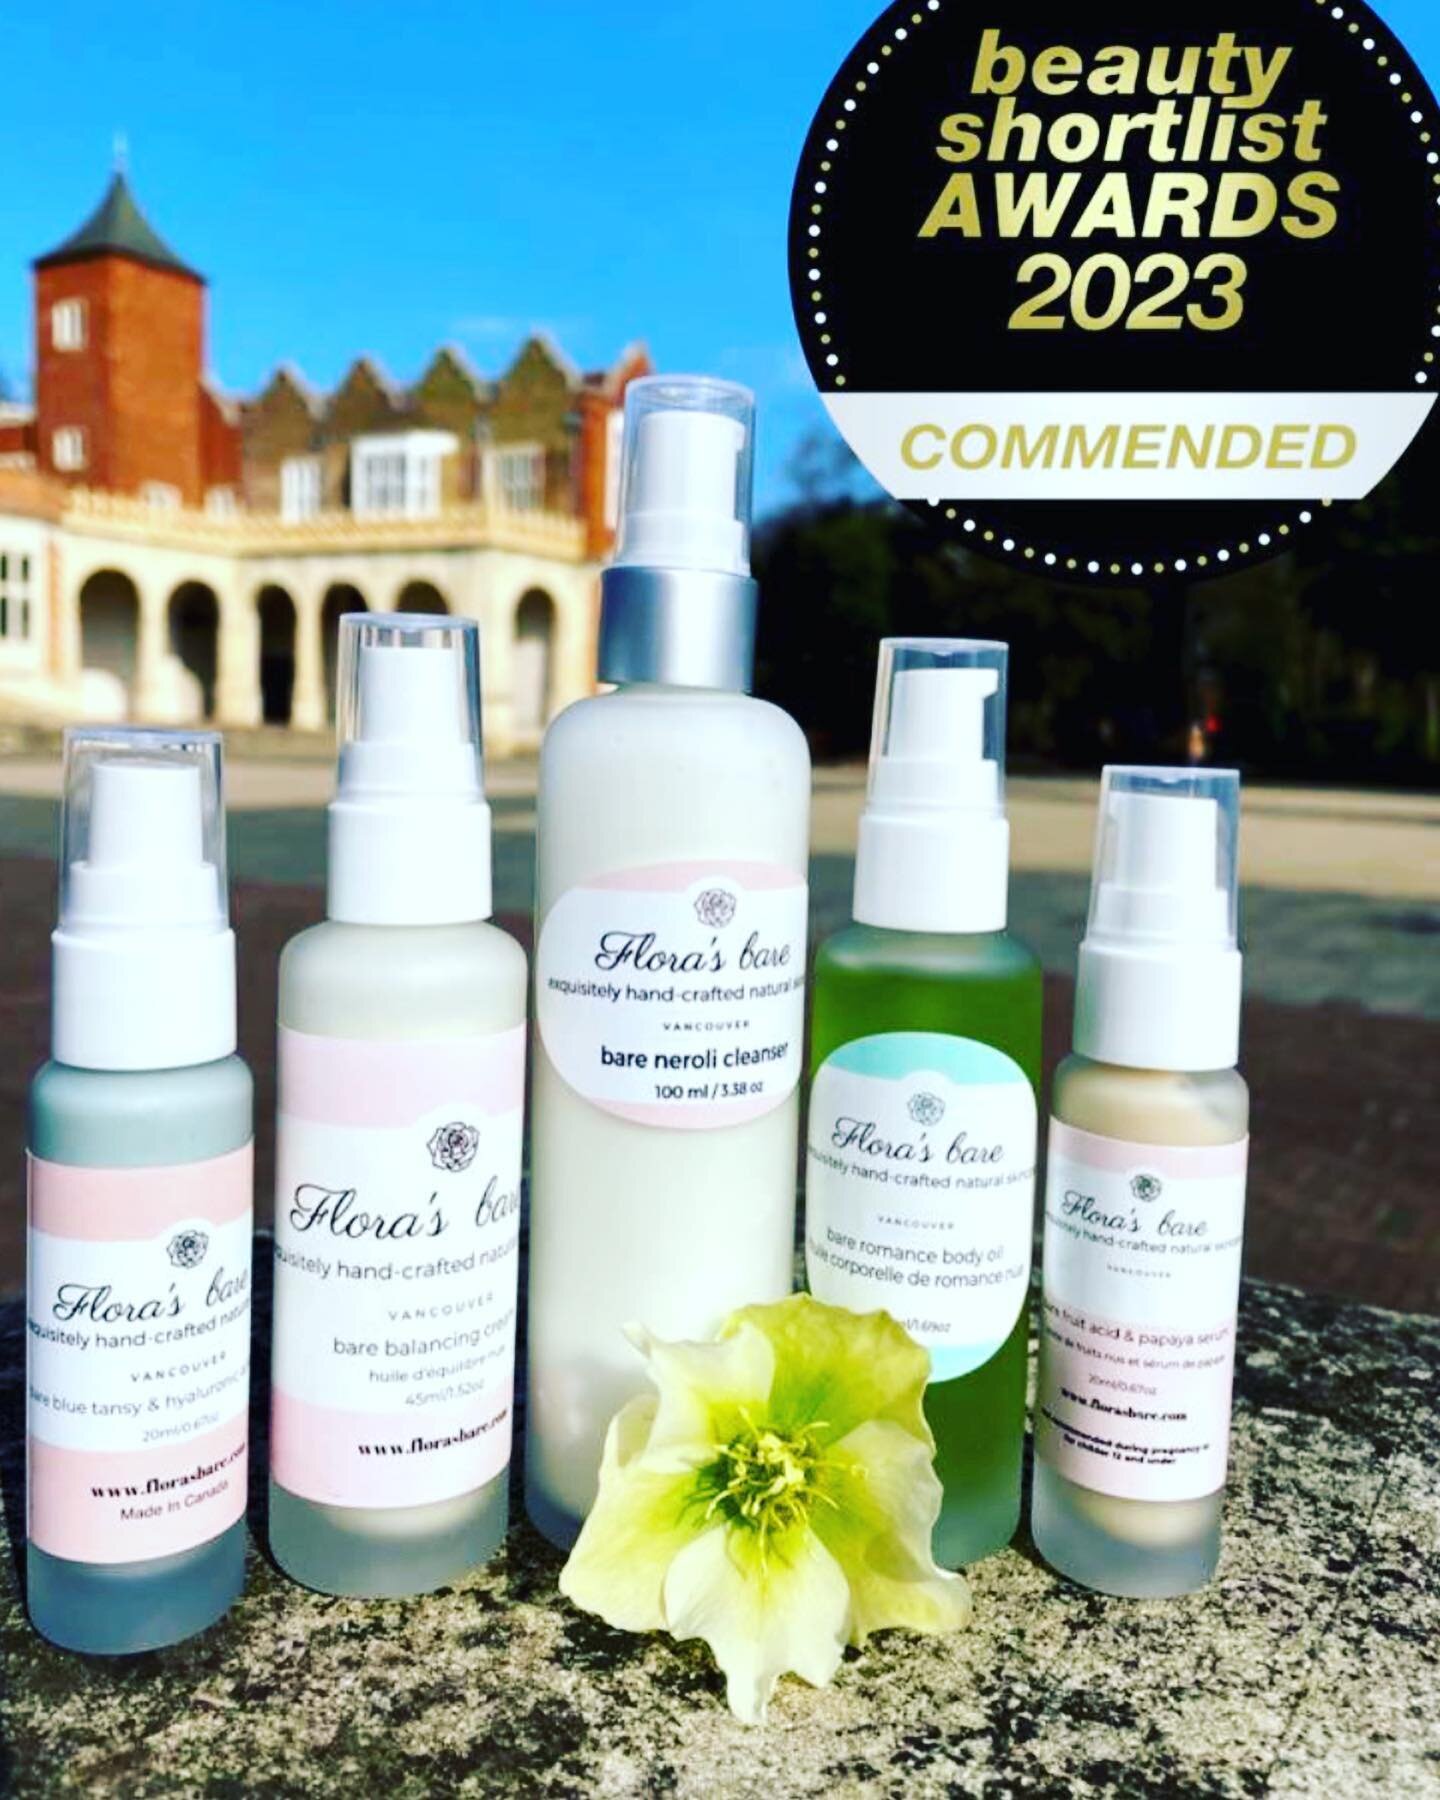 We are thrilled to announce that 5 of our products have been &lsquo;Commended&rsquo; in this year&rsquo;s Beauty Shortlist Awards! ⭐️ ⭐️⭐️⭐️⭐️
These international awards, judged by industry experts, are an annual celebration of the ethical natural an